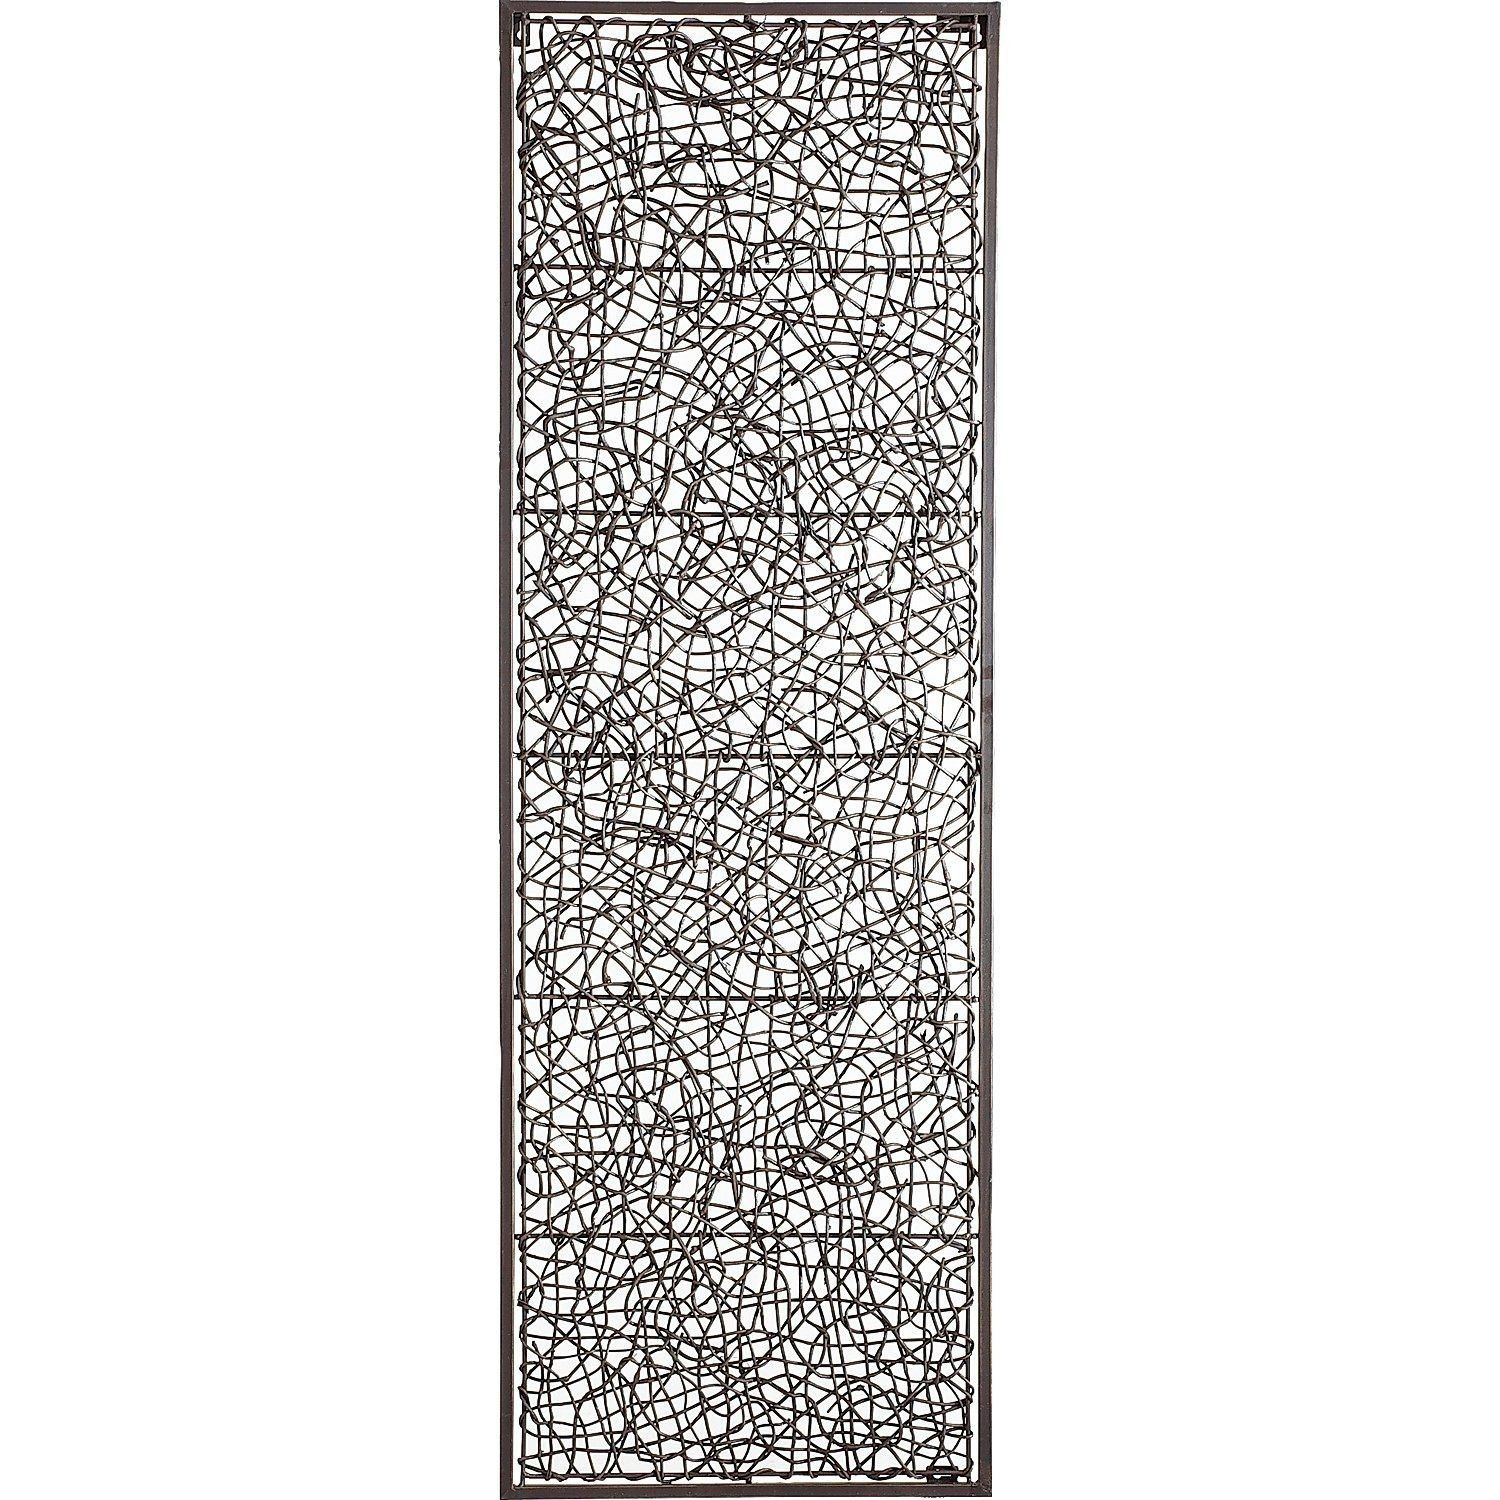 Metal Rattan Wall Decor Pier 1 Imports With Wicker Art | Realvalue – Intended For Pier 1 Wall Art (Photo 19 of 20)